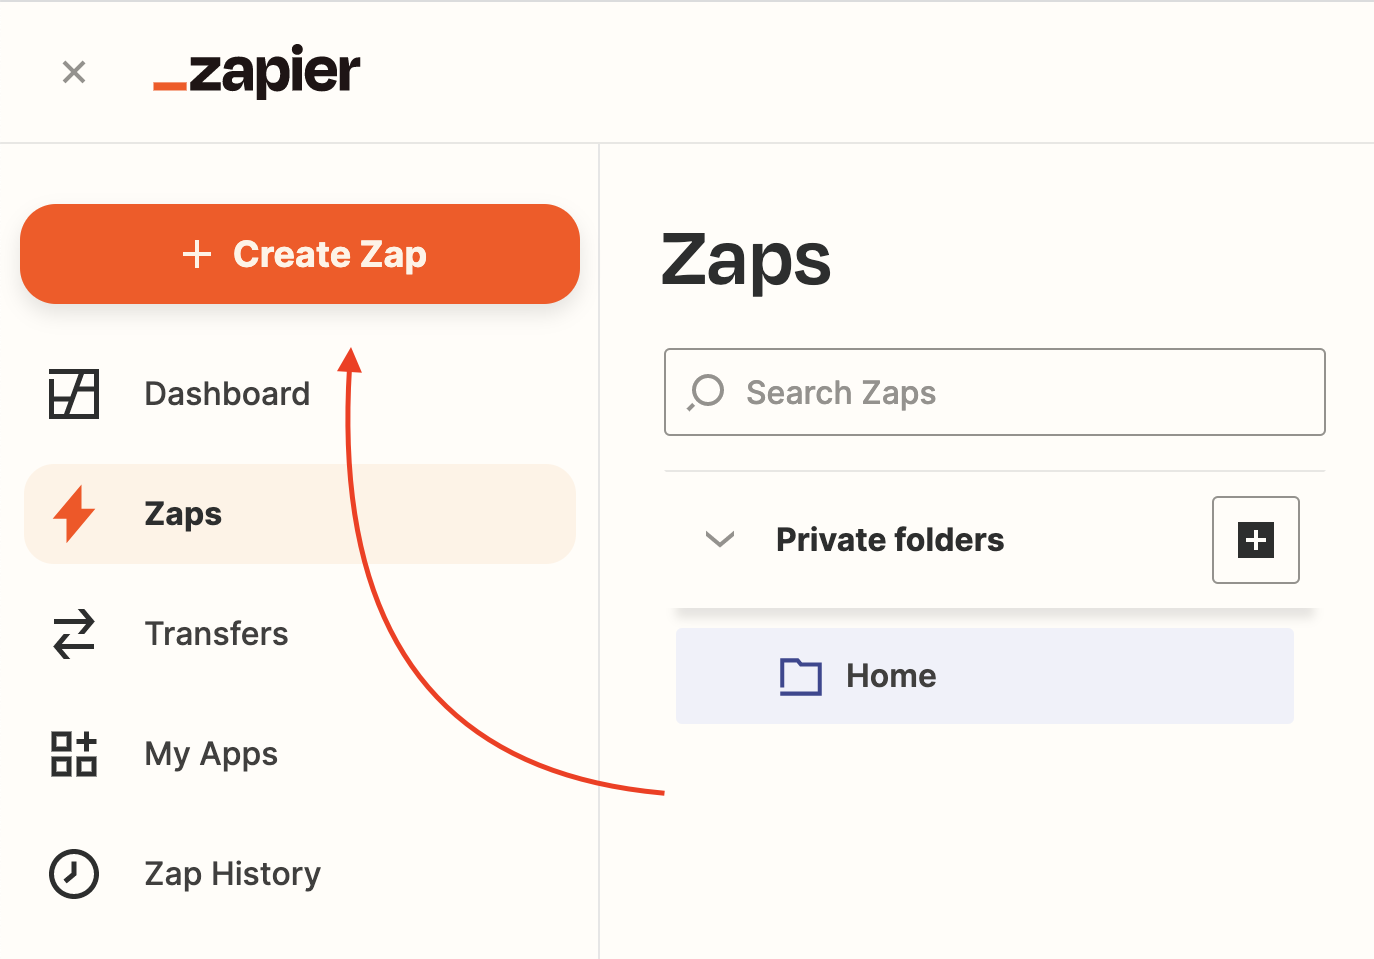 Screenshot from Zapier with a red arrow pointing to the 'Create Zap' button in the top right corner.